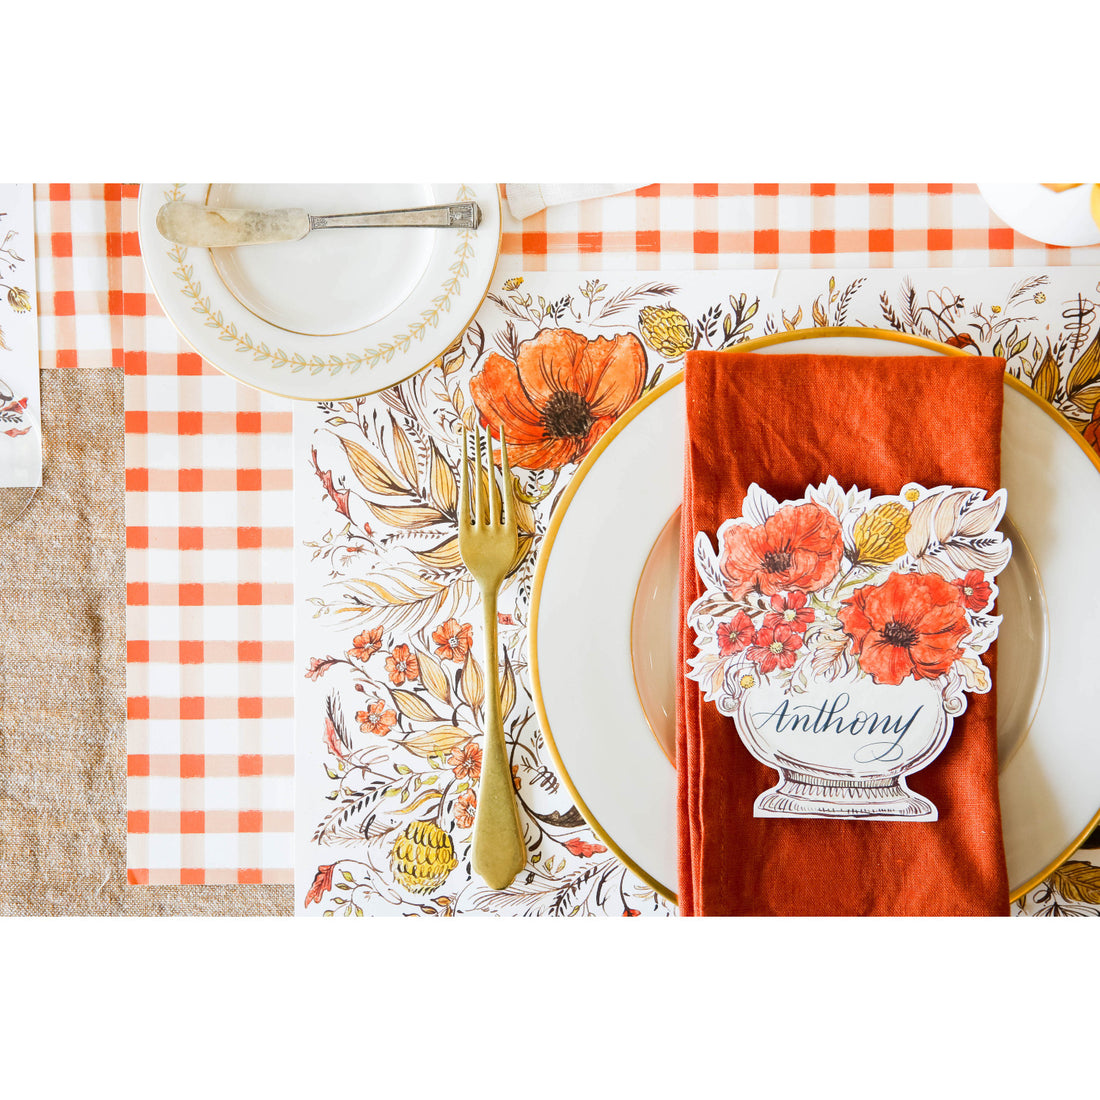 The Orange Painted Check Placemat under a fall-themed place setting, from above. 